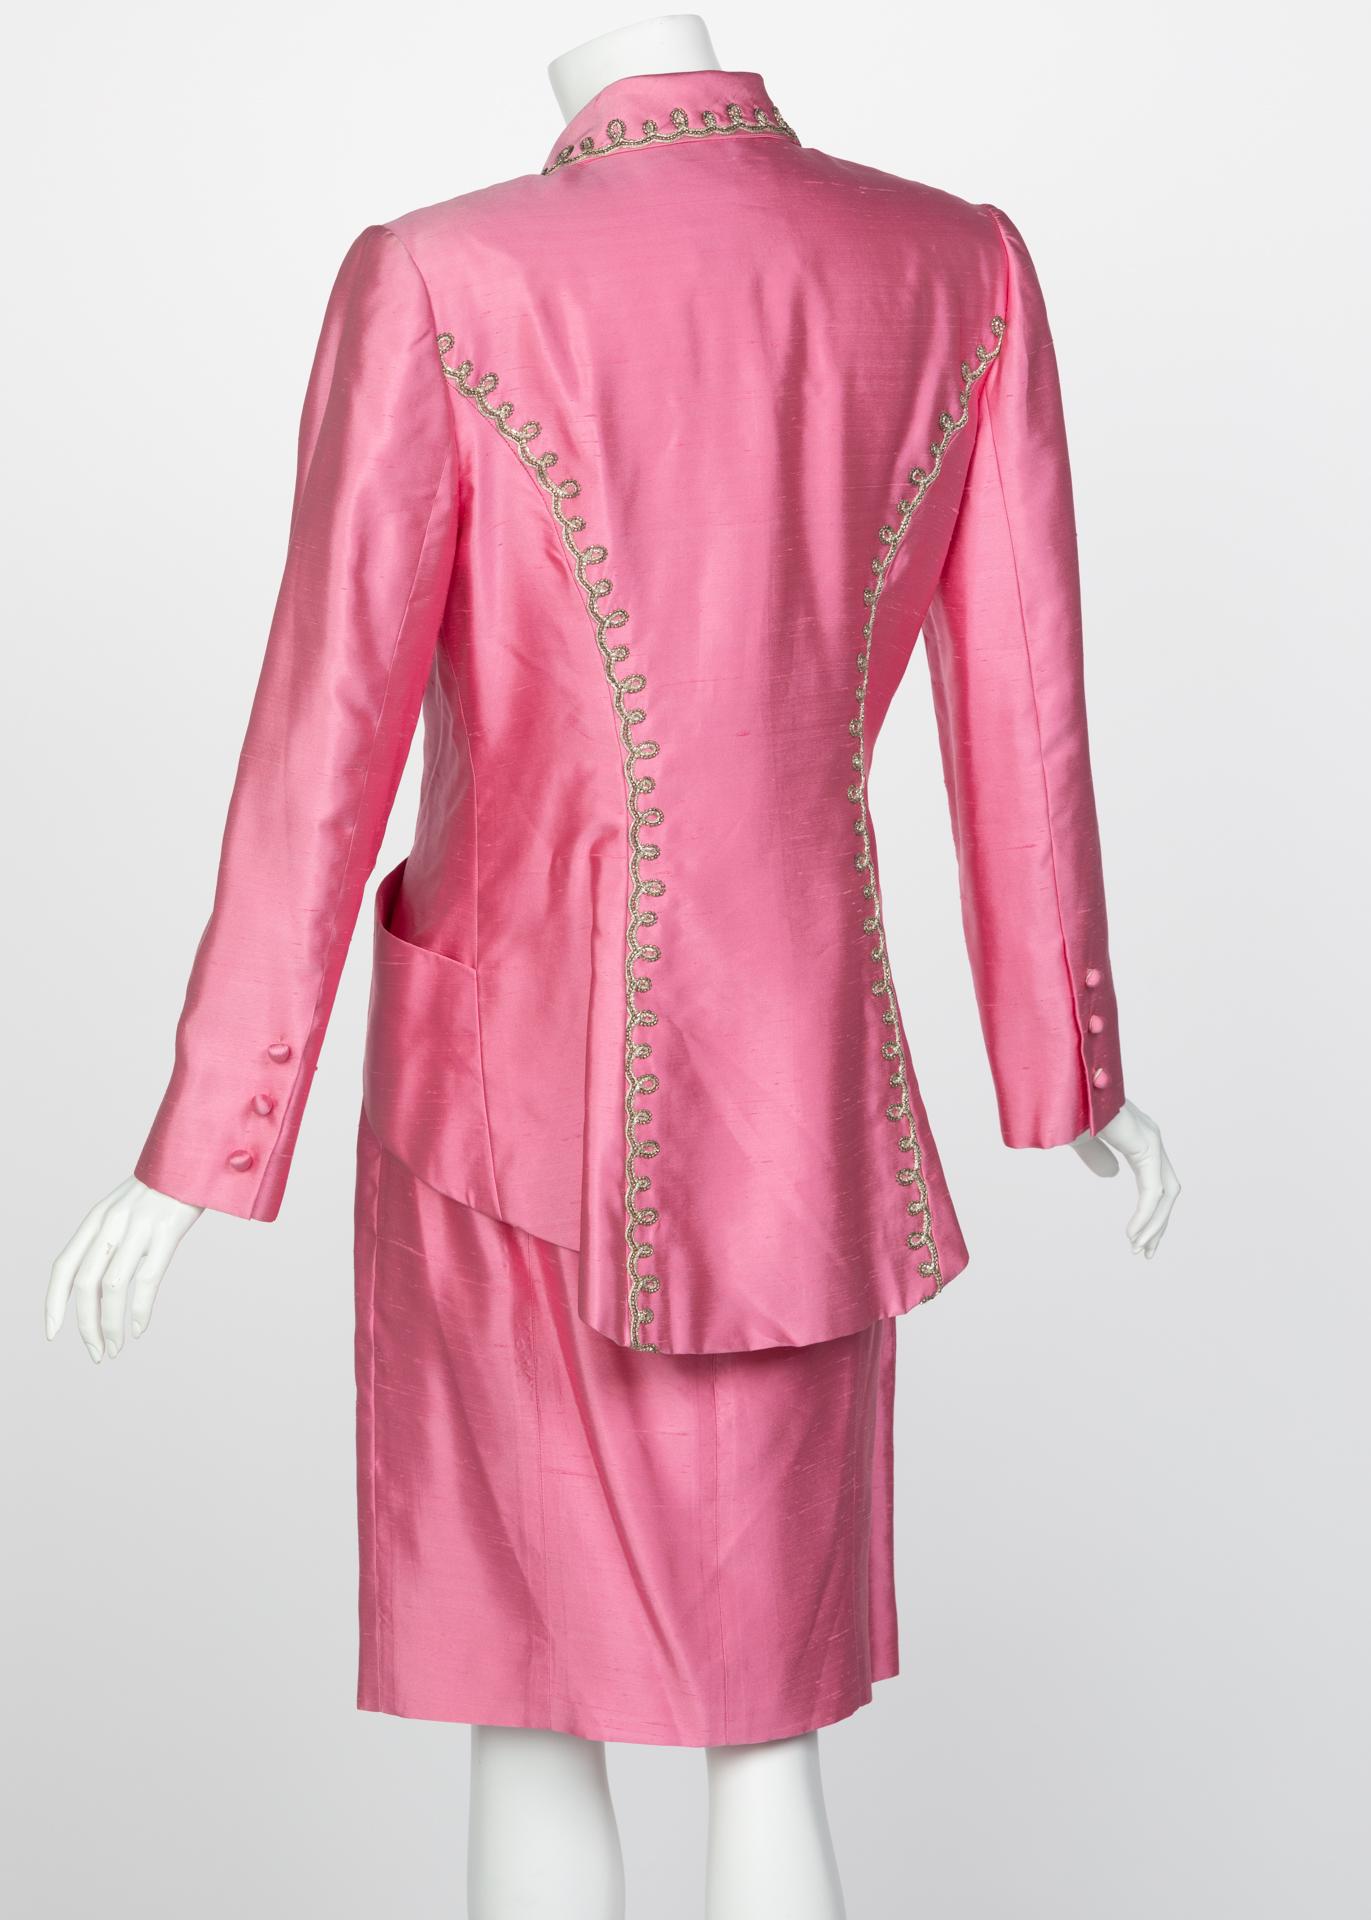 Vintage Chloé Pink Silk Shantung Embroidered Beaded Skirt Suit For Sale 1